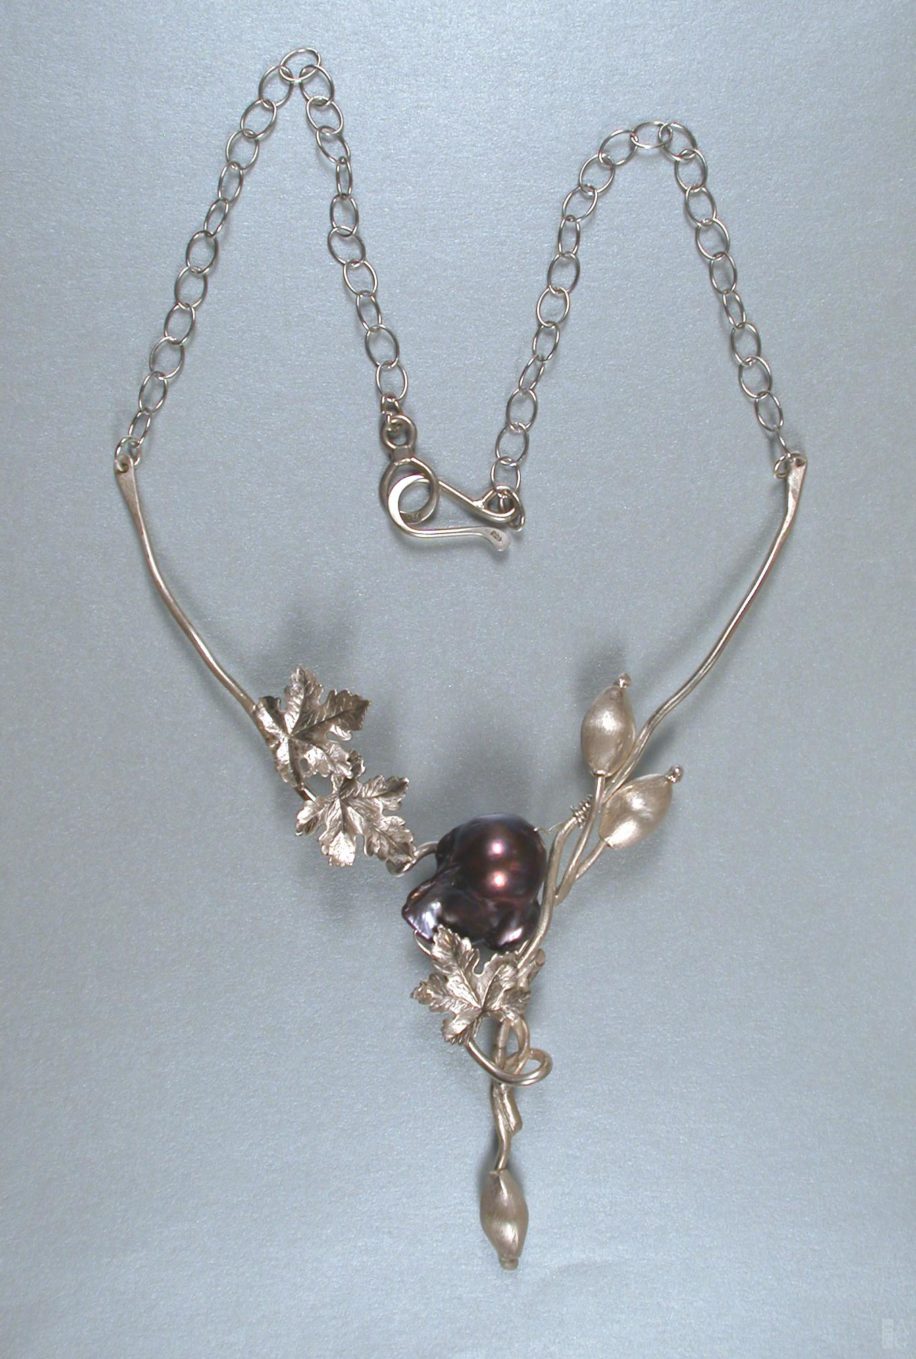 Handmade Baroque Pearl with Maple Leaves Necklace by Darlene Letendre at The Avenue Gallery, a contemporary fine art gallery in Victoria, BC, Canada.